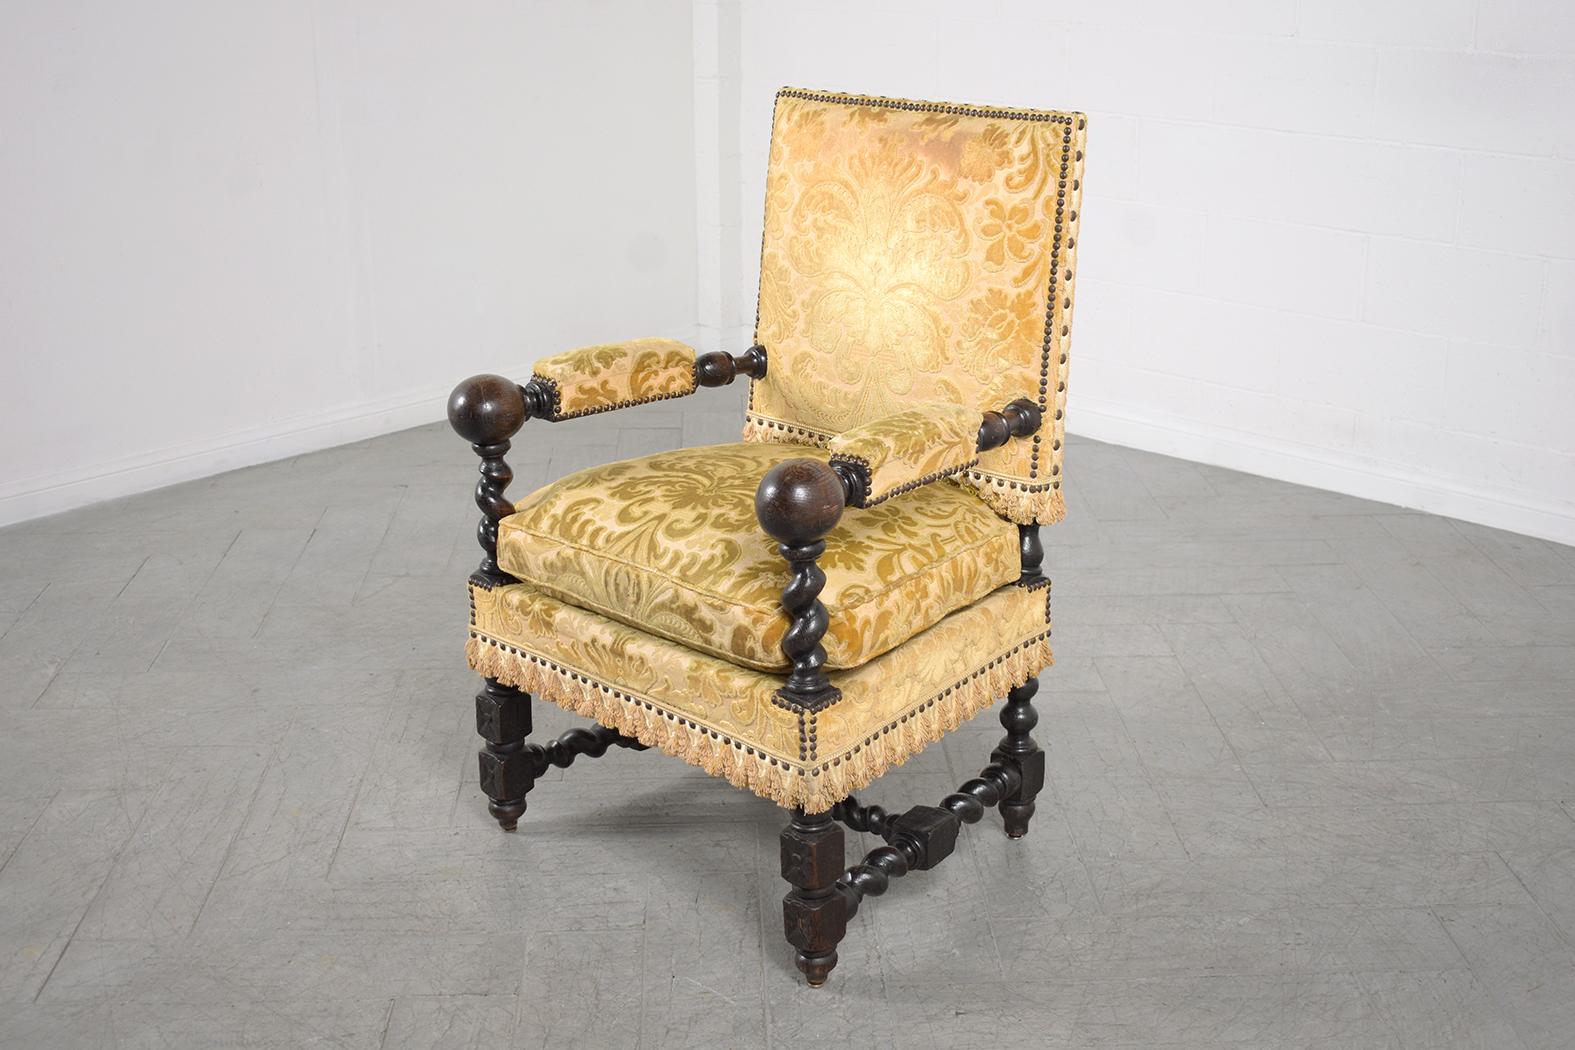 19th Century French Oak Armchair: Dark Walnut Patina Finish & Floral Upholstery In Good Condition For Sale In Los Angeles, CA